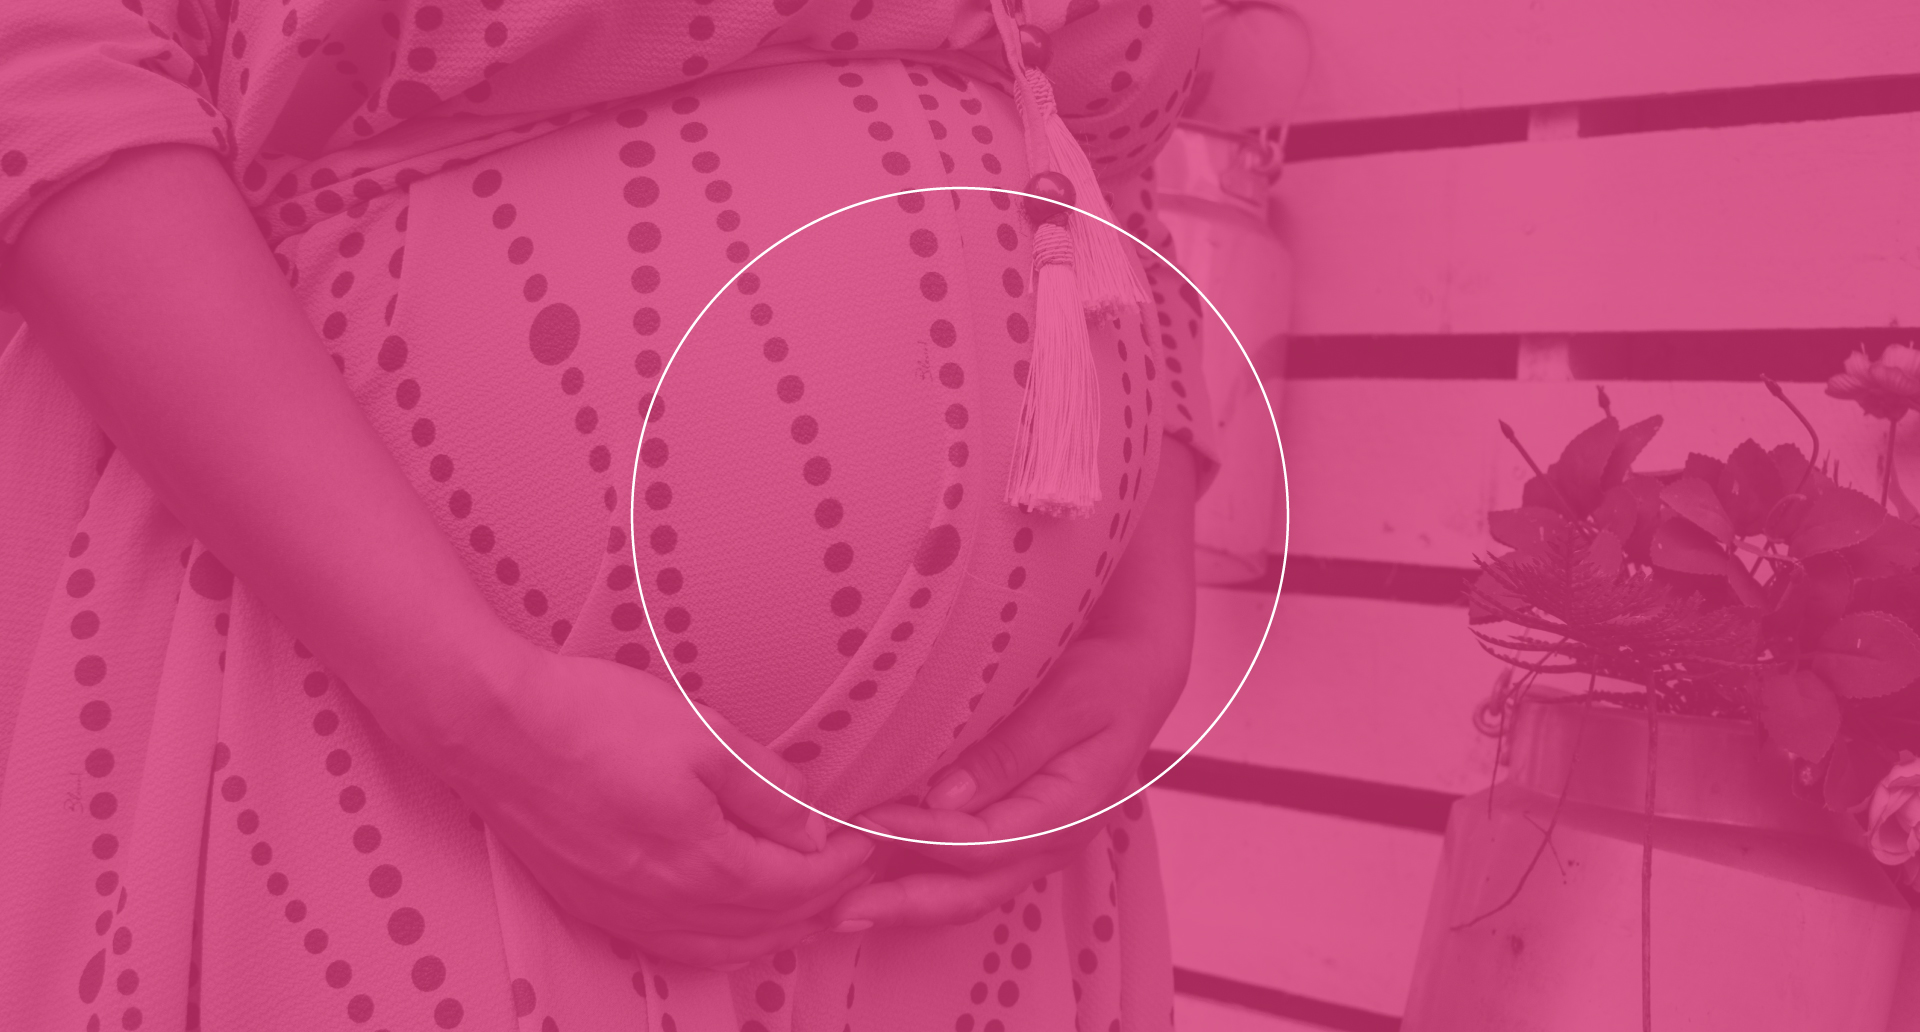 FALSE: There is no evidence that pregnant women are at greater risk of getting Covid-19